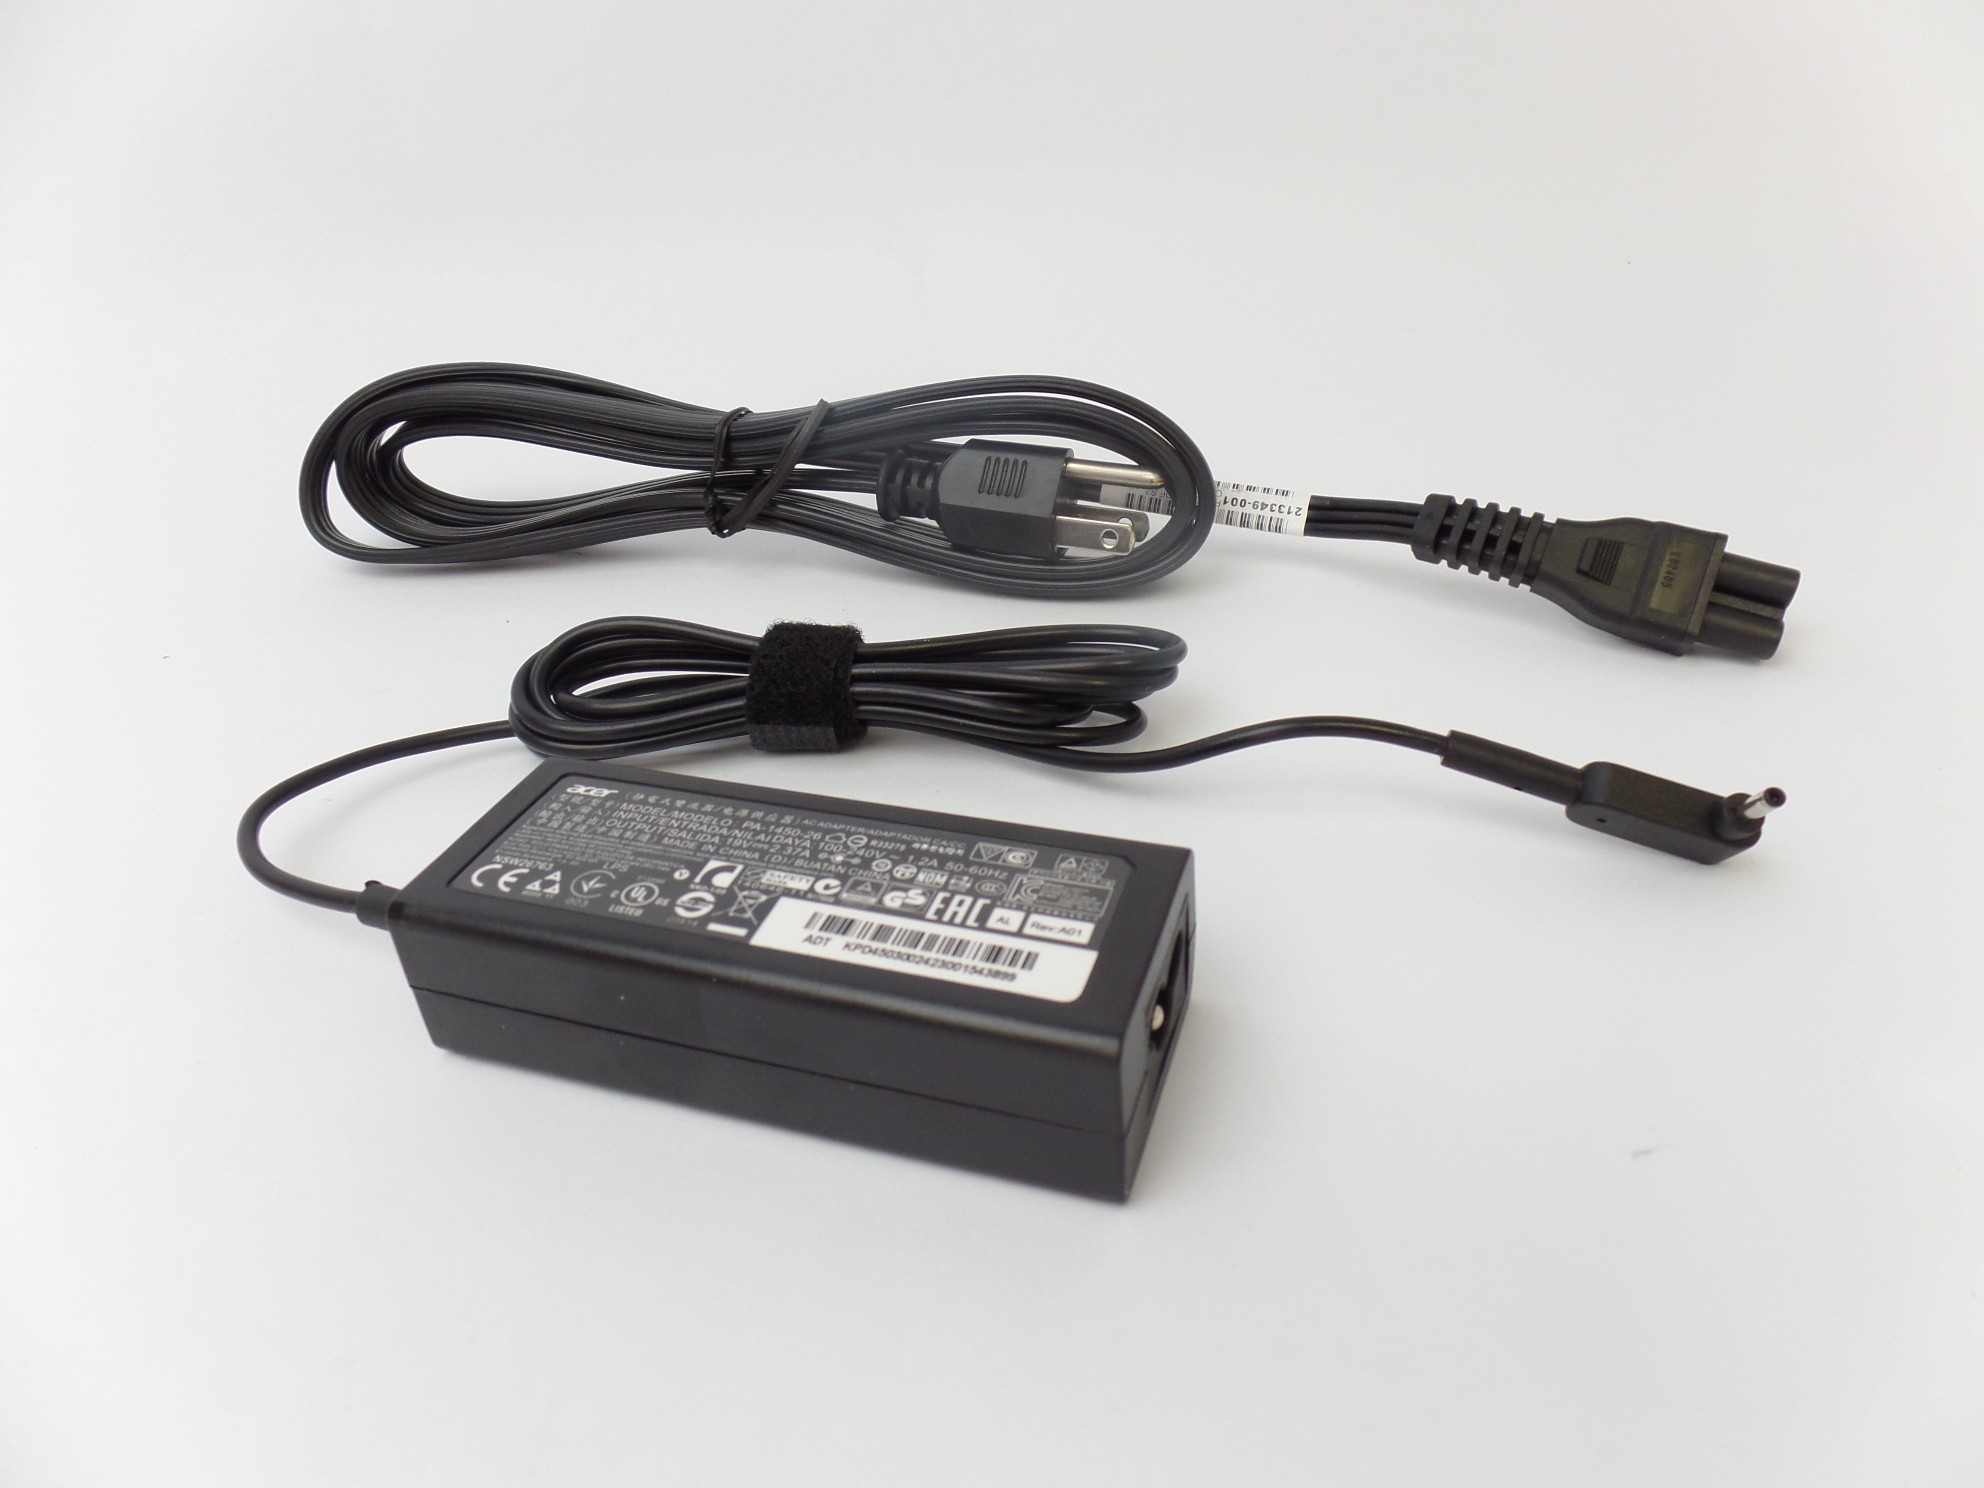 Charger AC Adapter Power Supply for Acer Chromebook 45W C720 C740 C738T CB5-132T